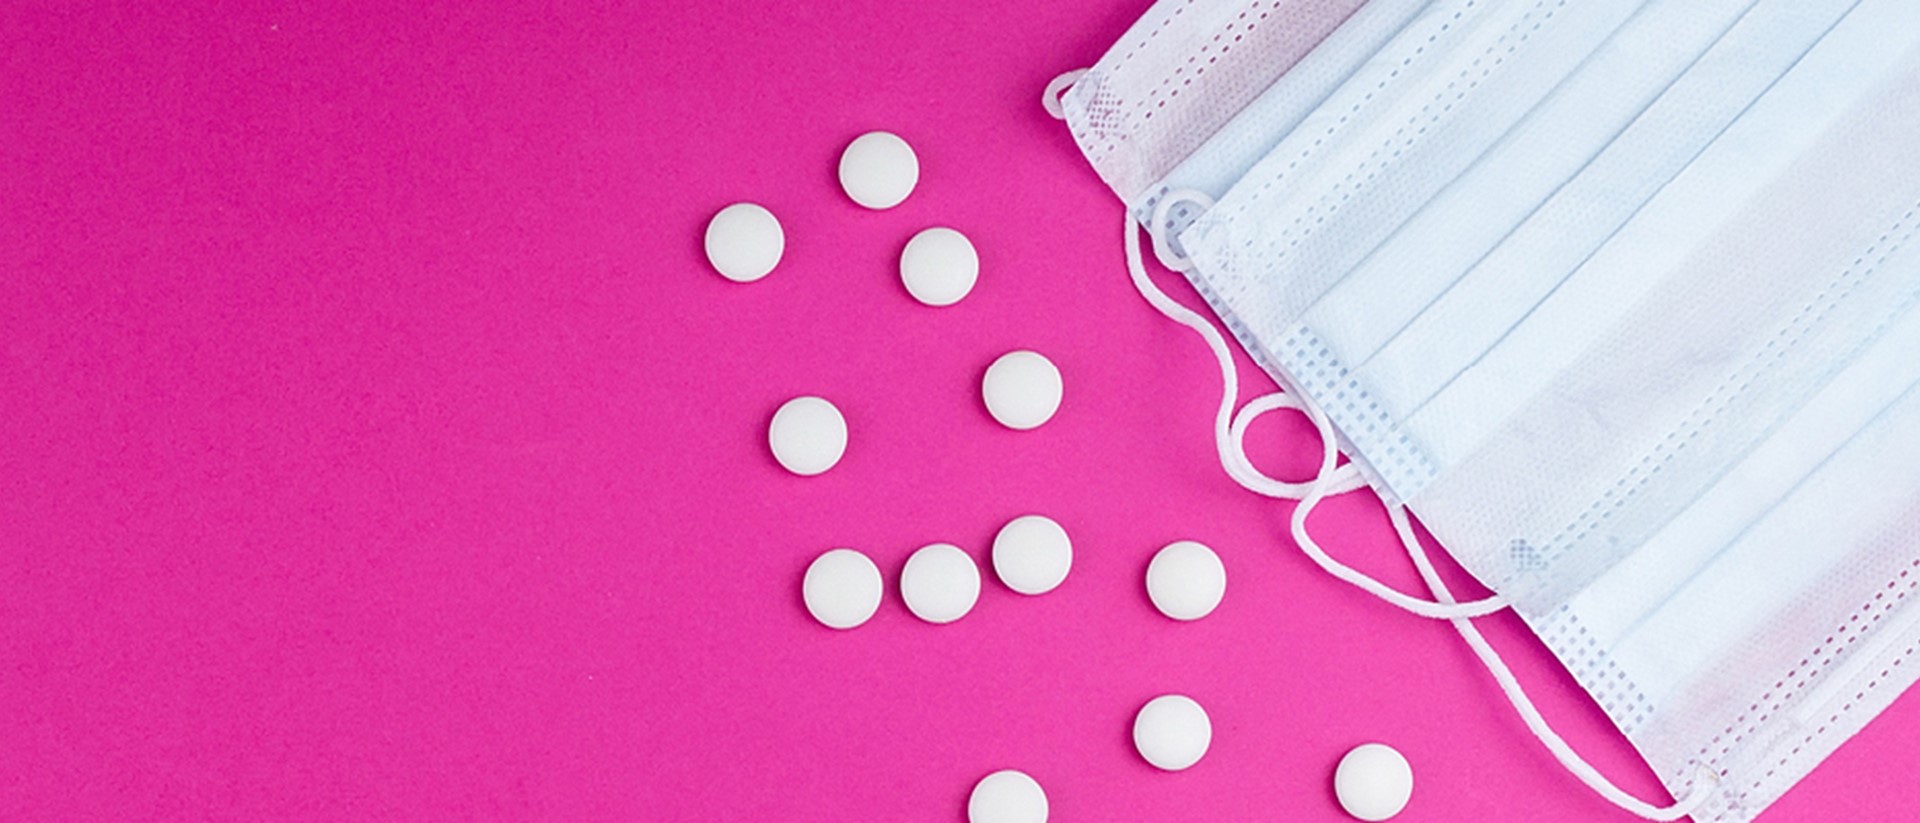 Image of a white surgical mask and pills on a pink background